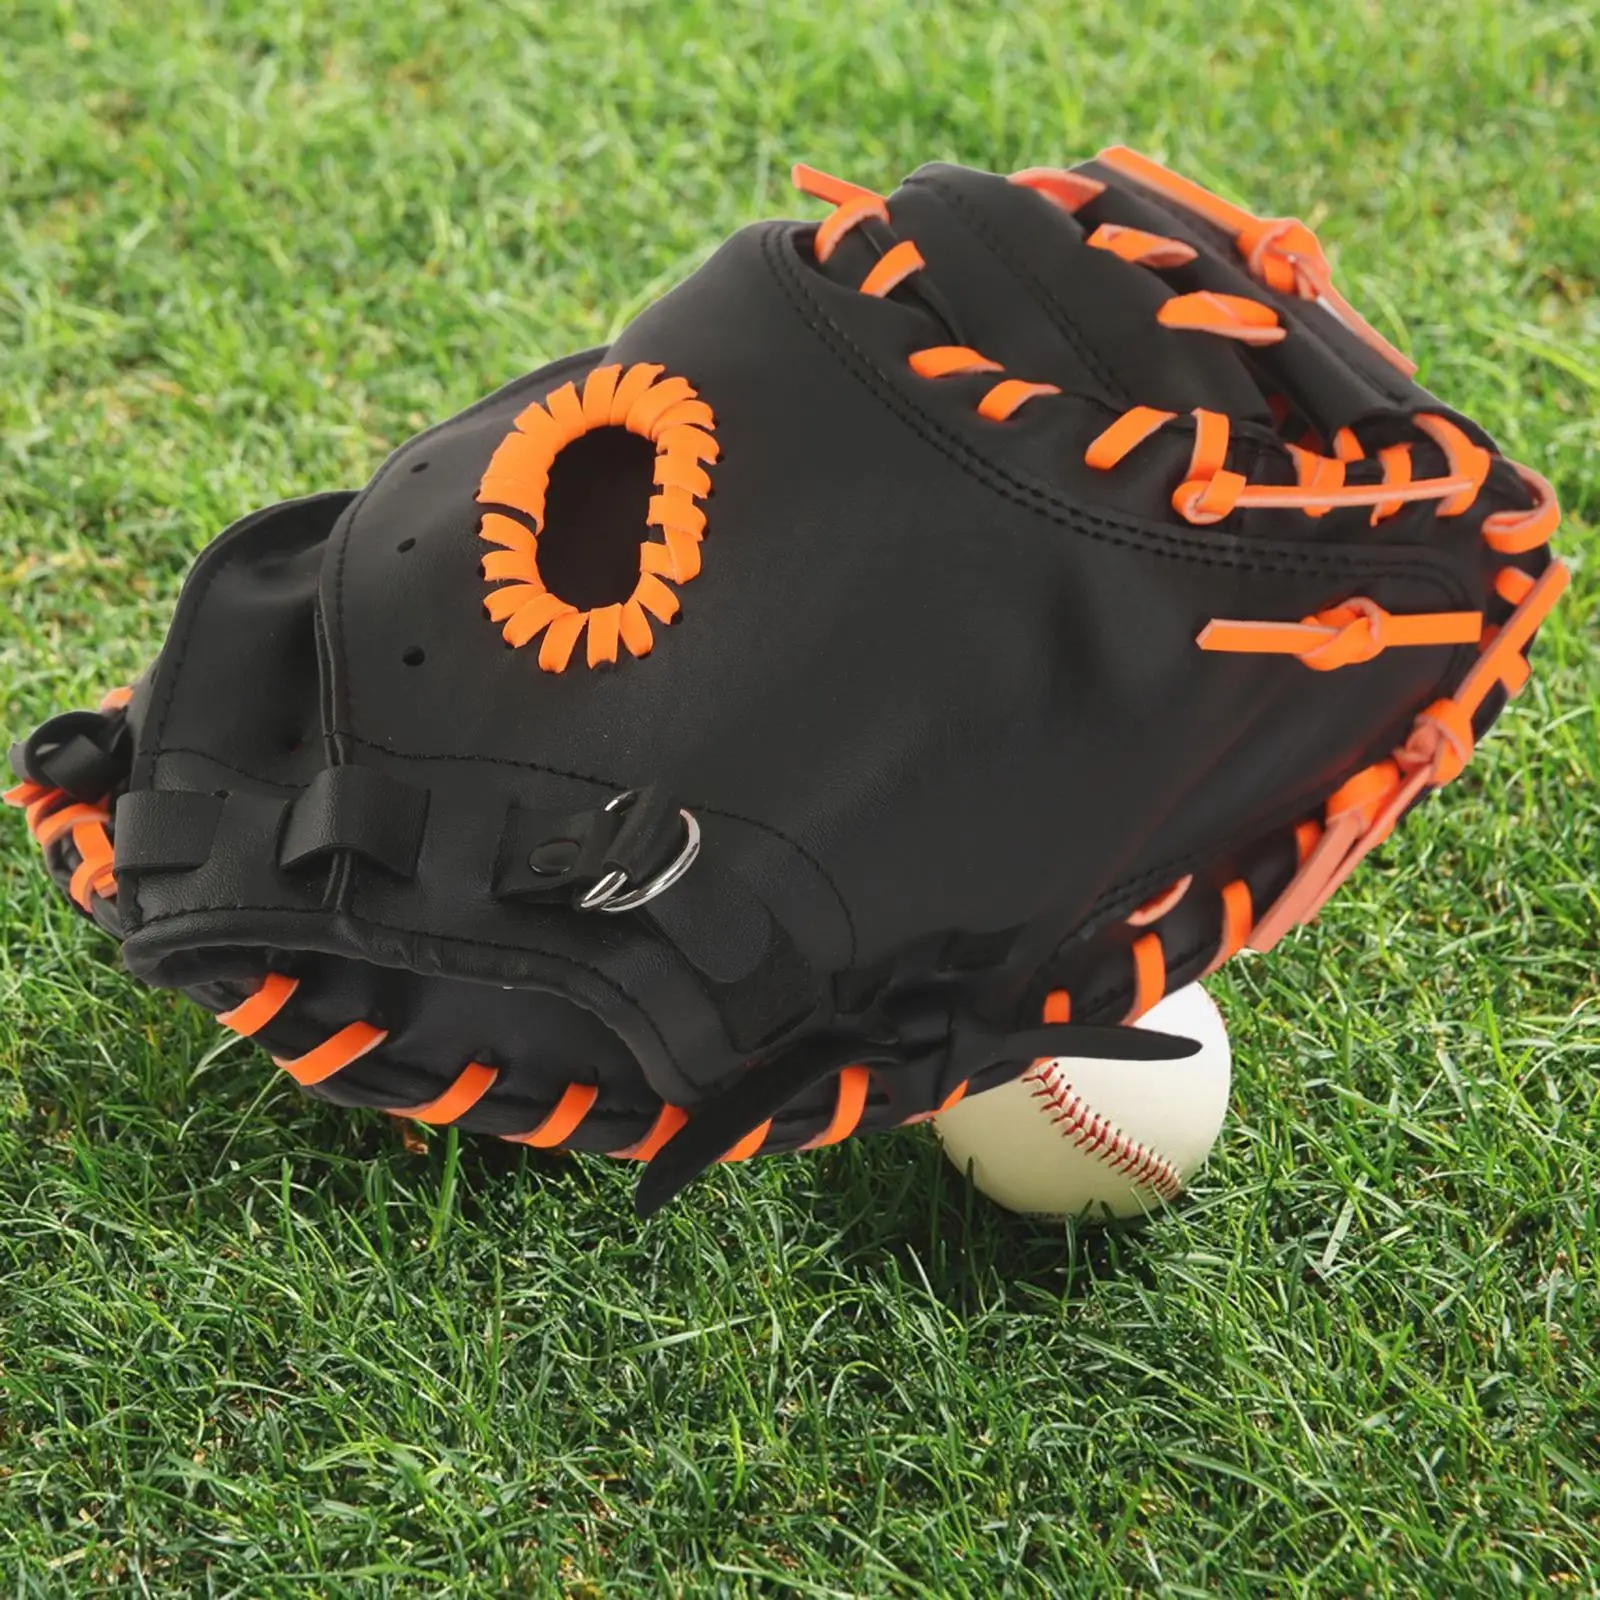 Sports Baseball Glove Thickening Outfield Infield Baseball Softball Mitt Catcher Mitts Sports Batting Gloves for Adults Practice